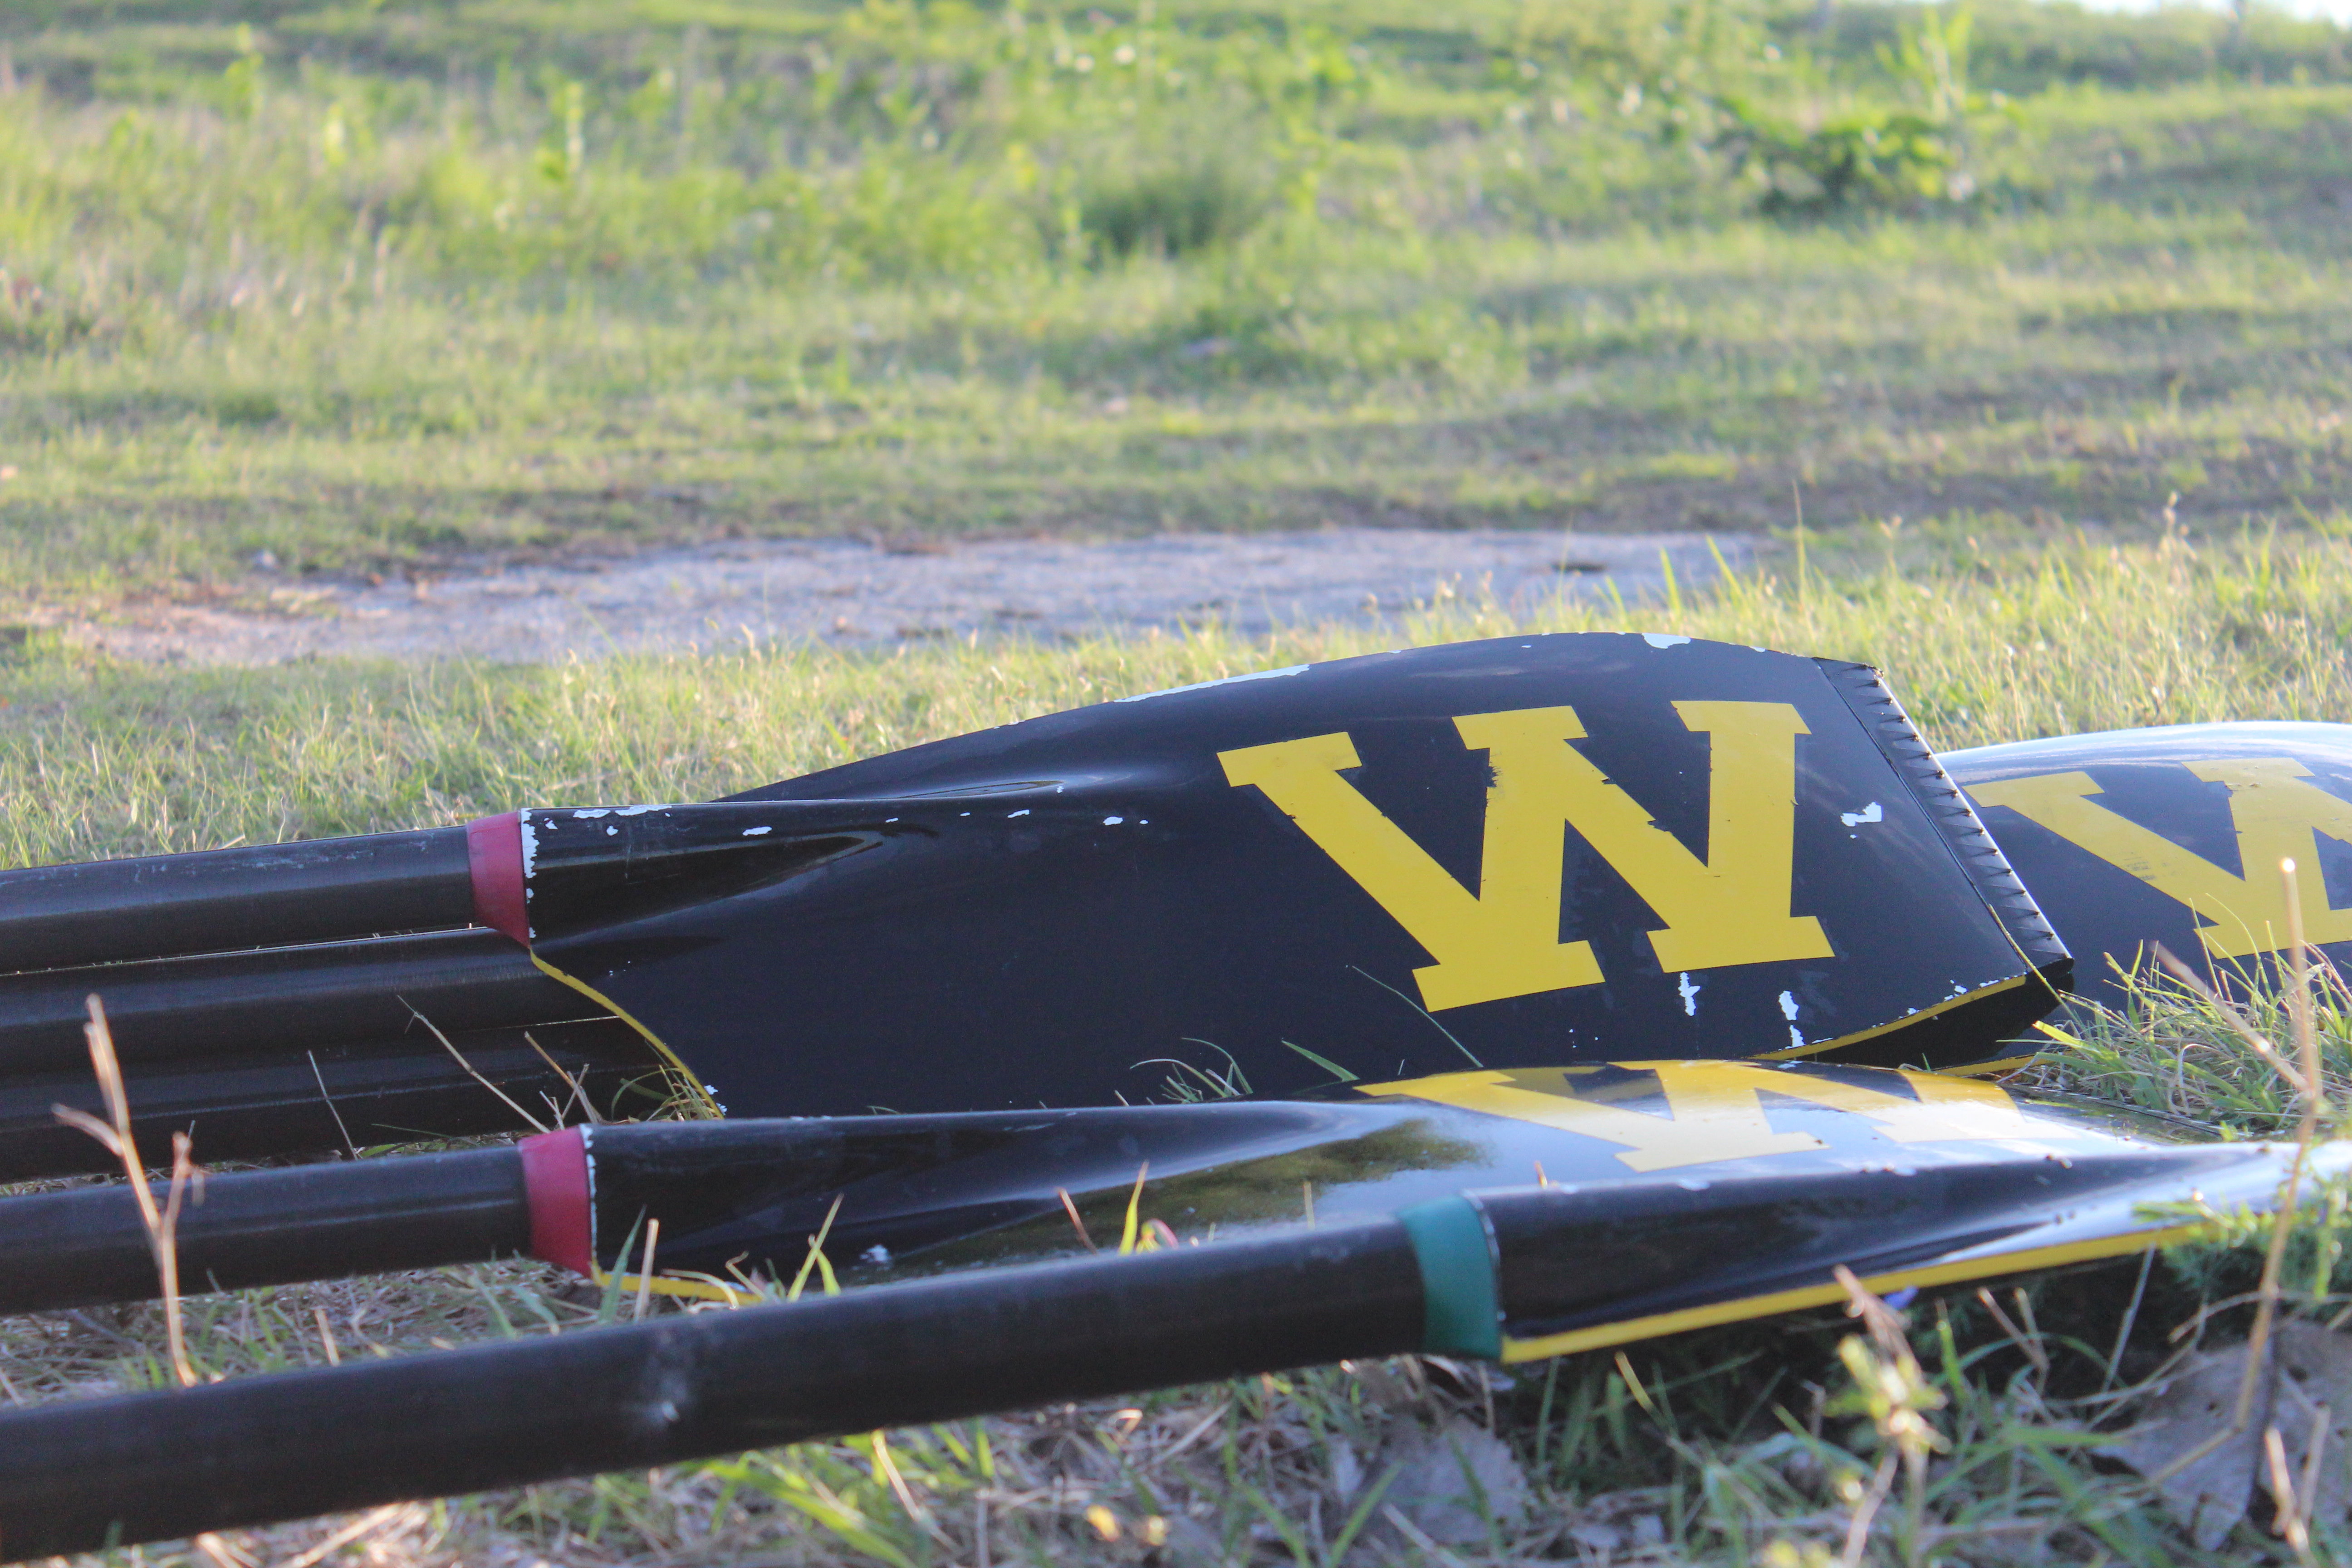 closeup of oars on grassy ground. The yellow W is prominent on the black blade.